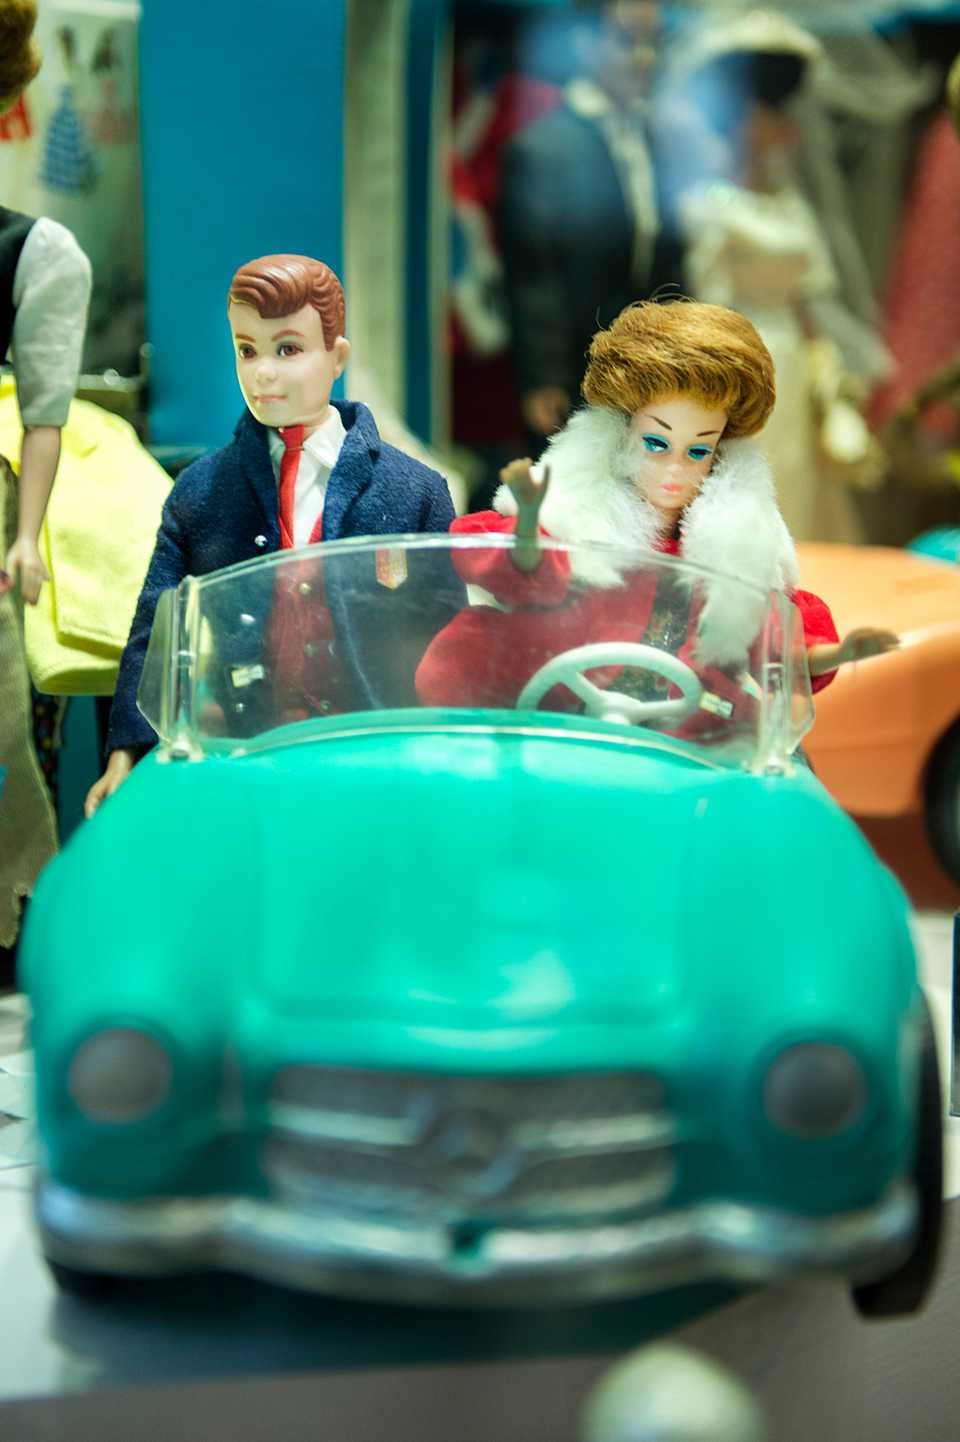 “Zealots criticise Barbie because she’s an independent working woman. Look at her driving her own car, with Ken in the passenger seat,” comments Sunay Akin.